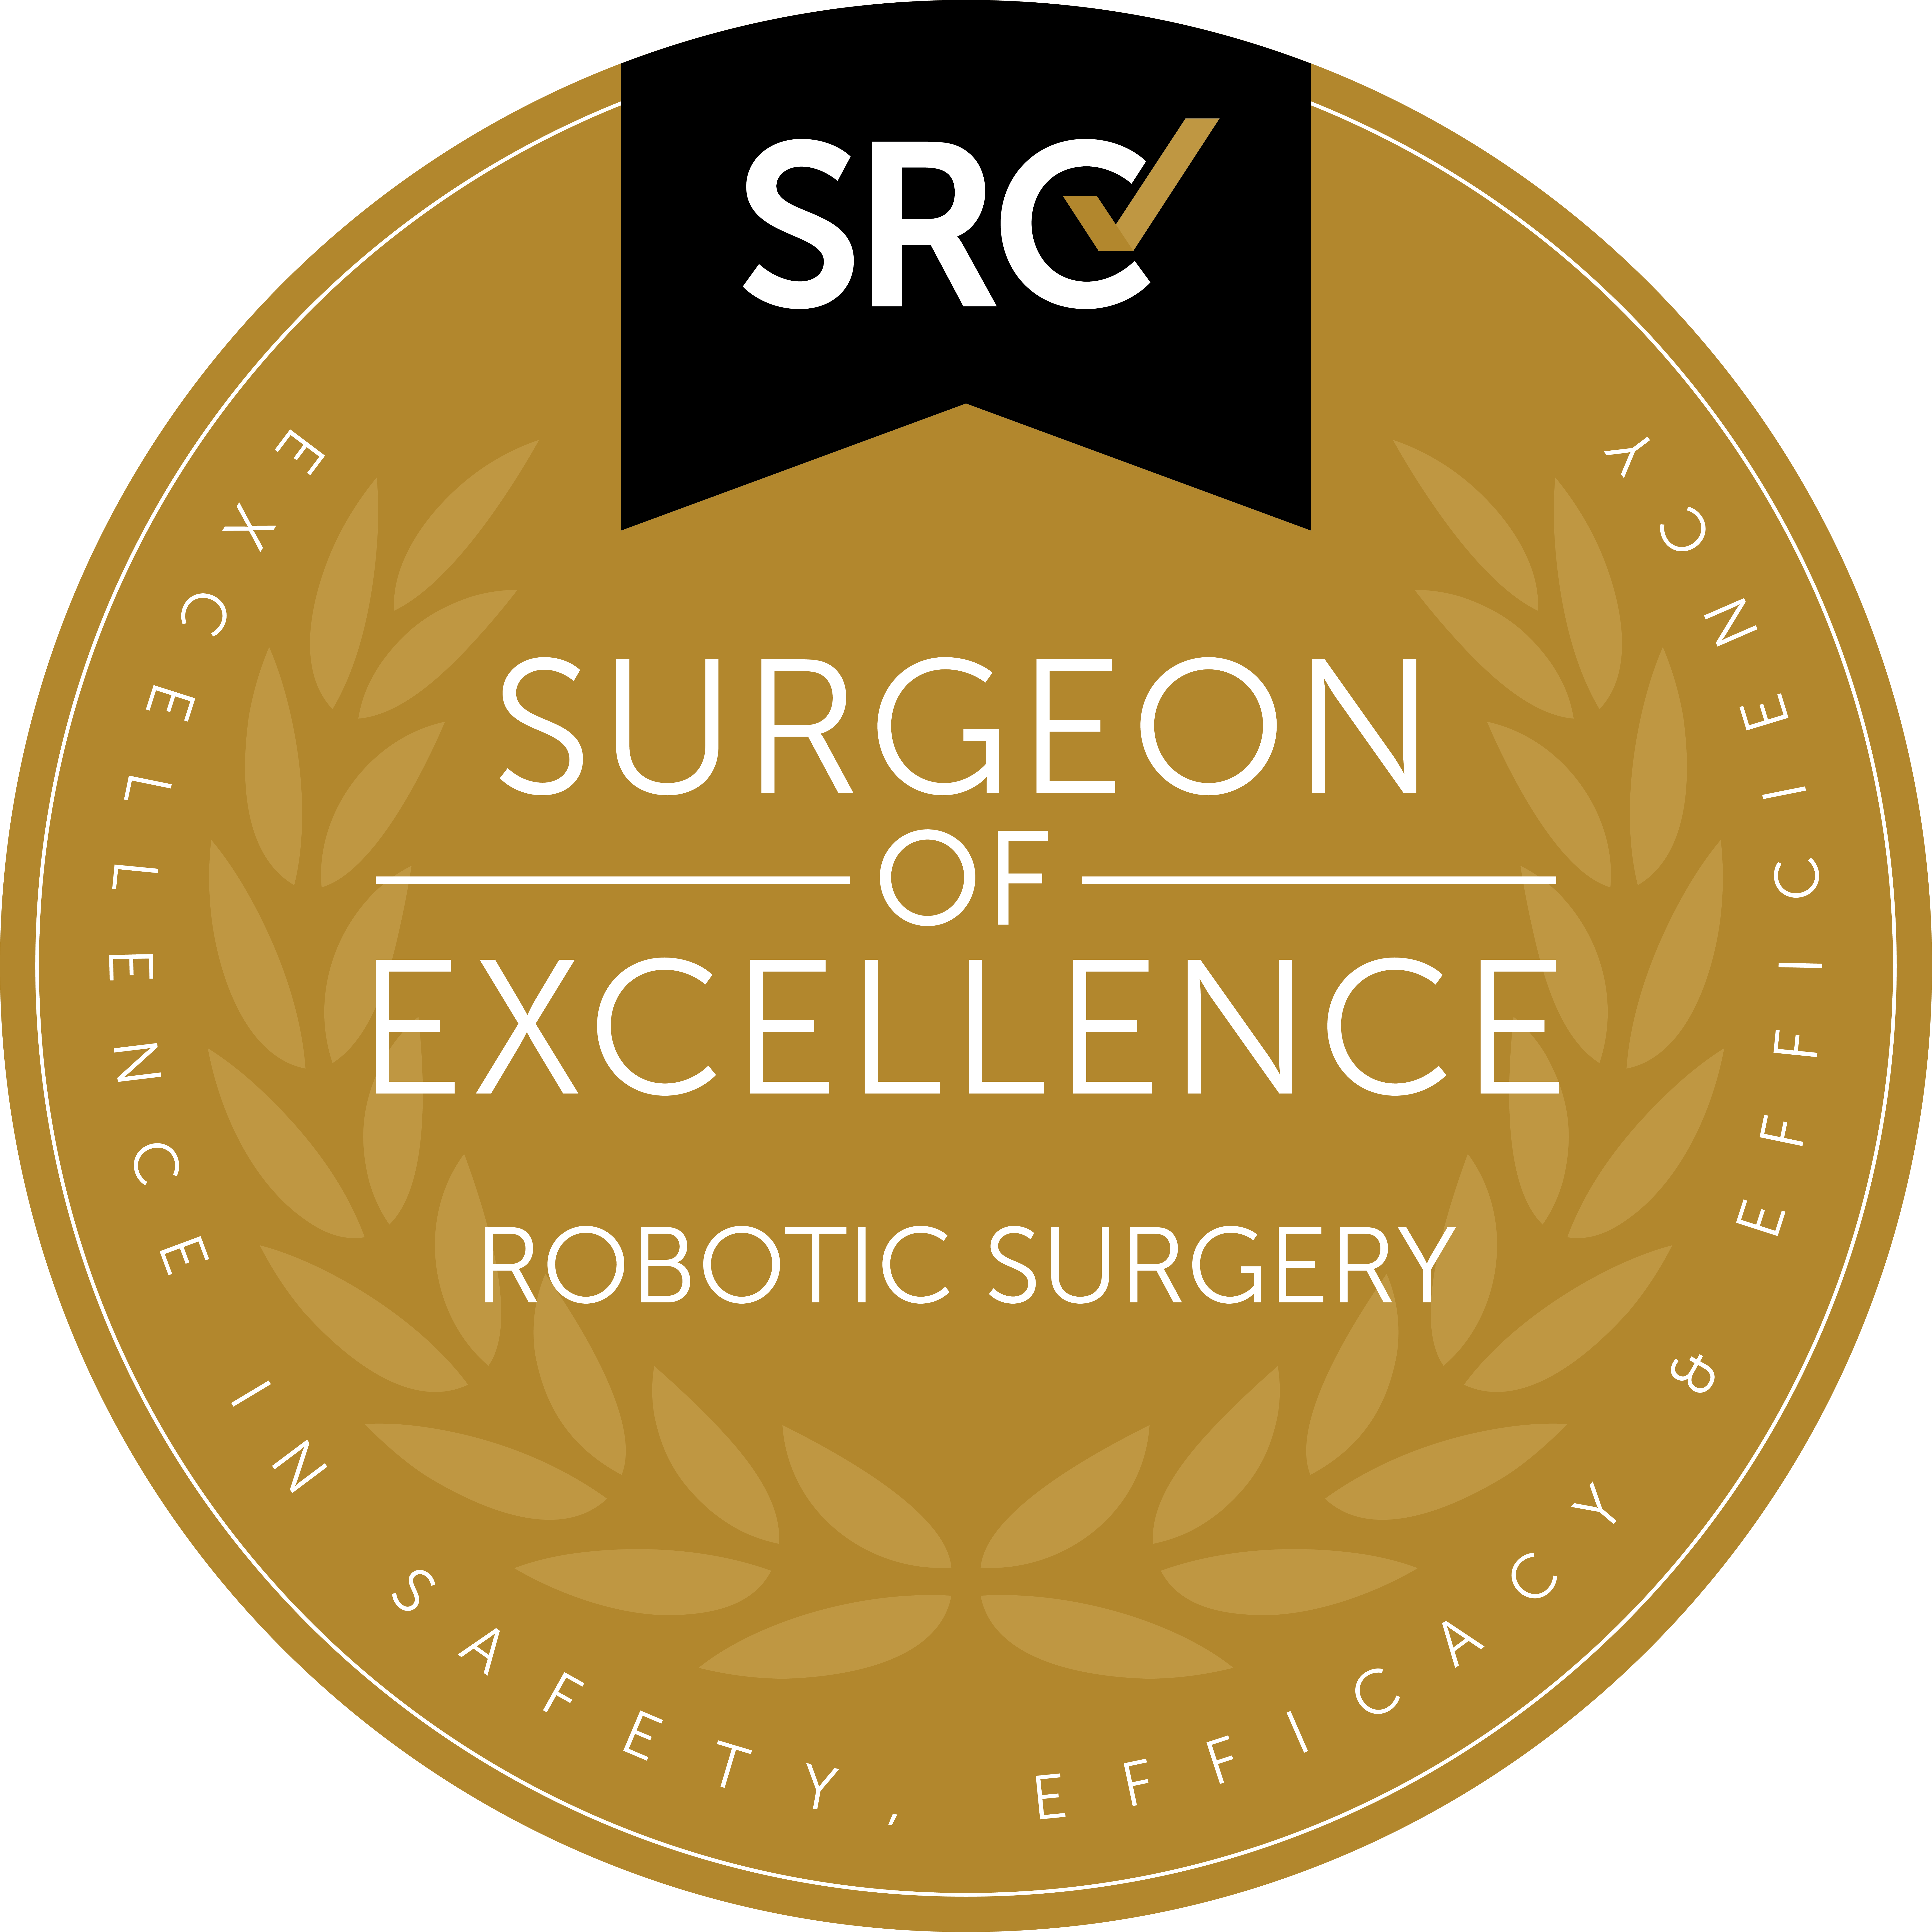 Surgeon of Excellence in Robotic Surgery as recognized by the SRC